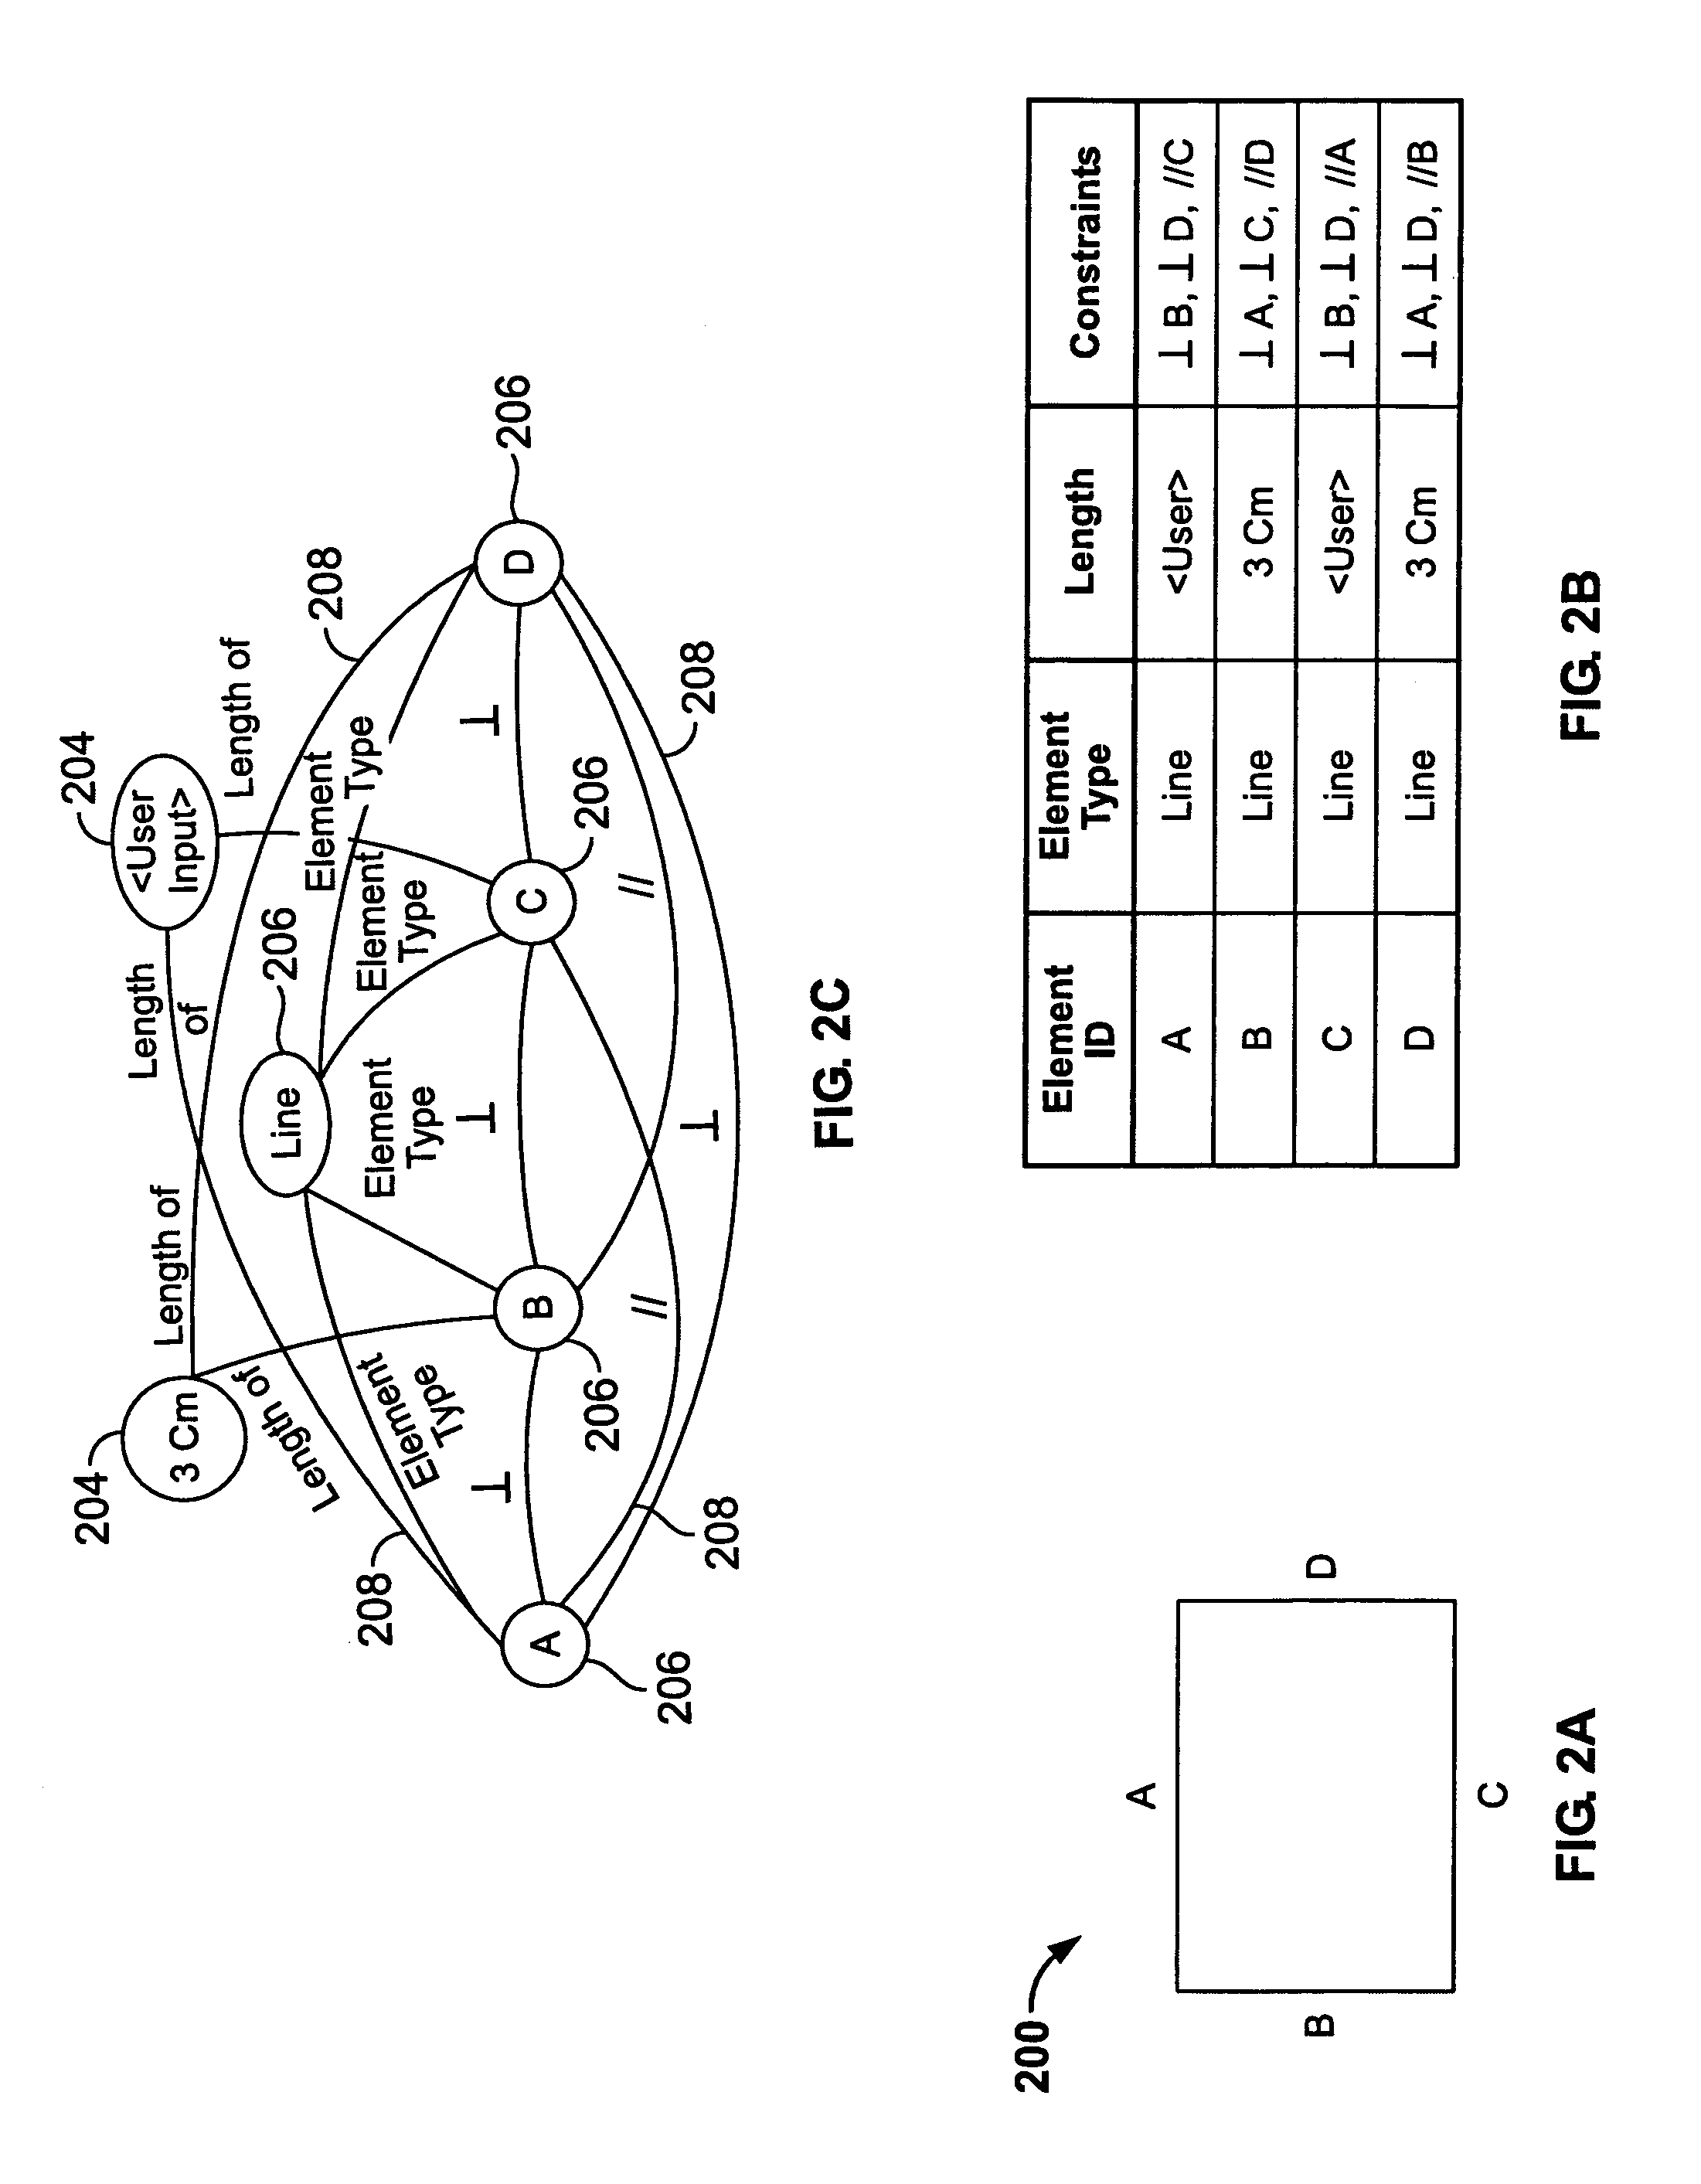 Method and apparatus for reusing subparts of one mechanical design for another mechanical design